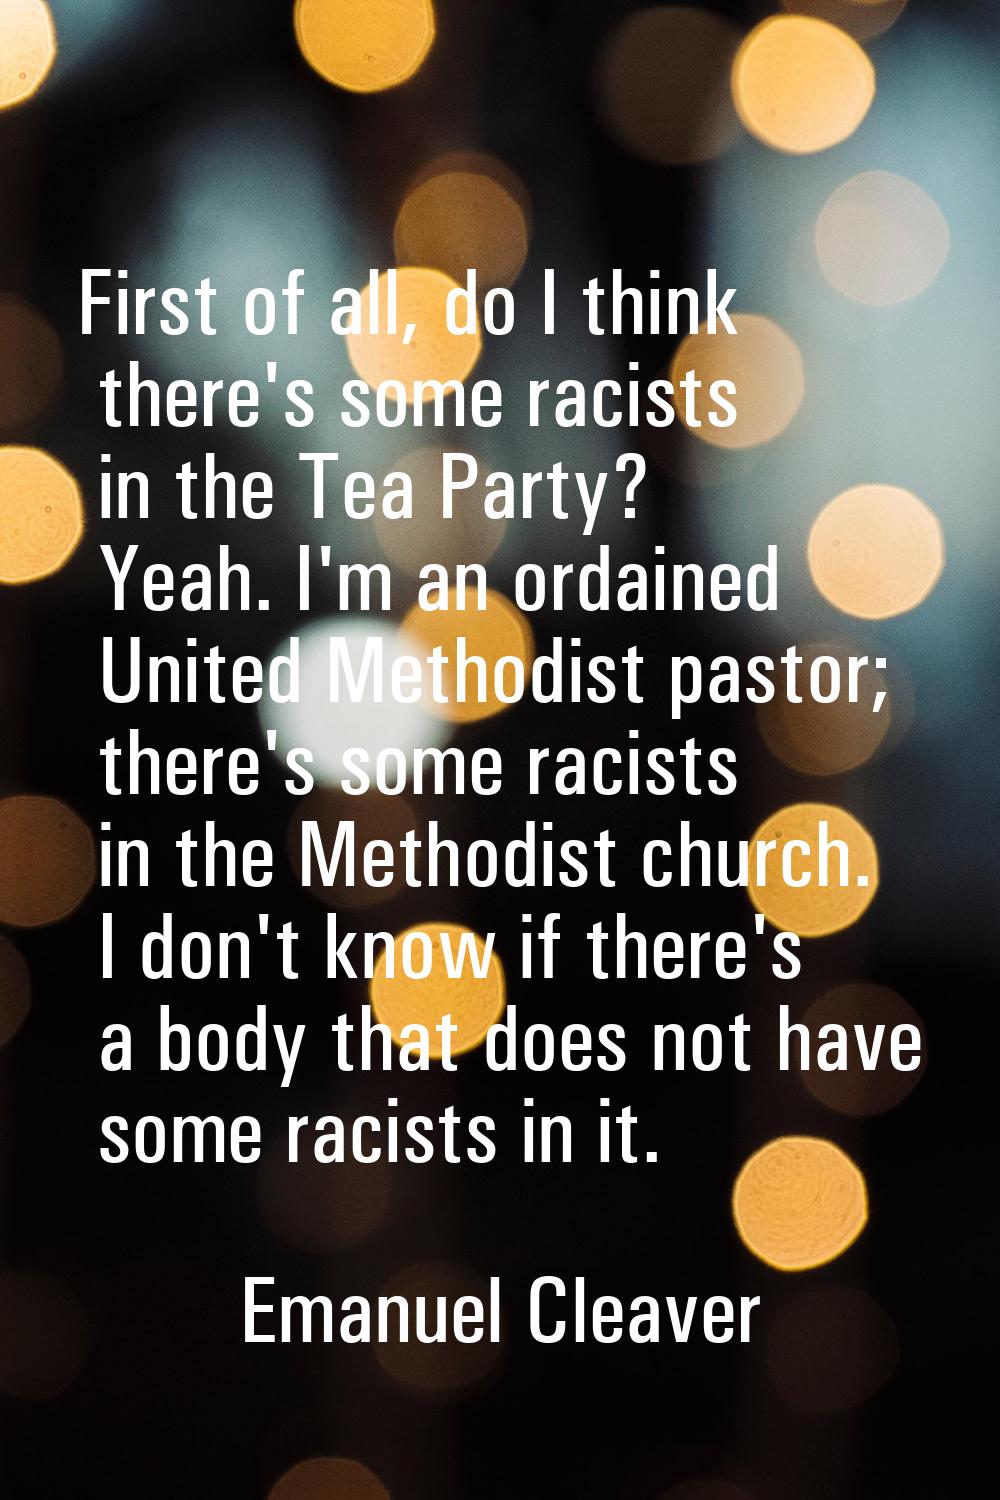 First of all, do I think there's some racists in the Tea Party? Yeah. I'm an ordained United Method